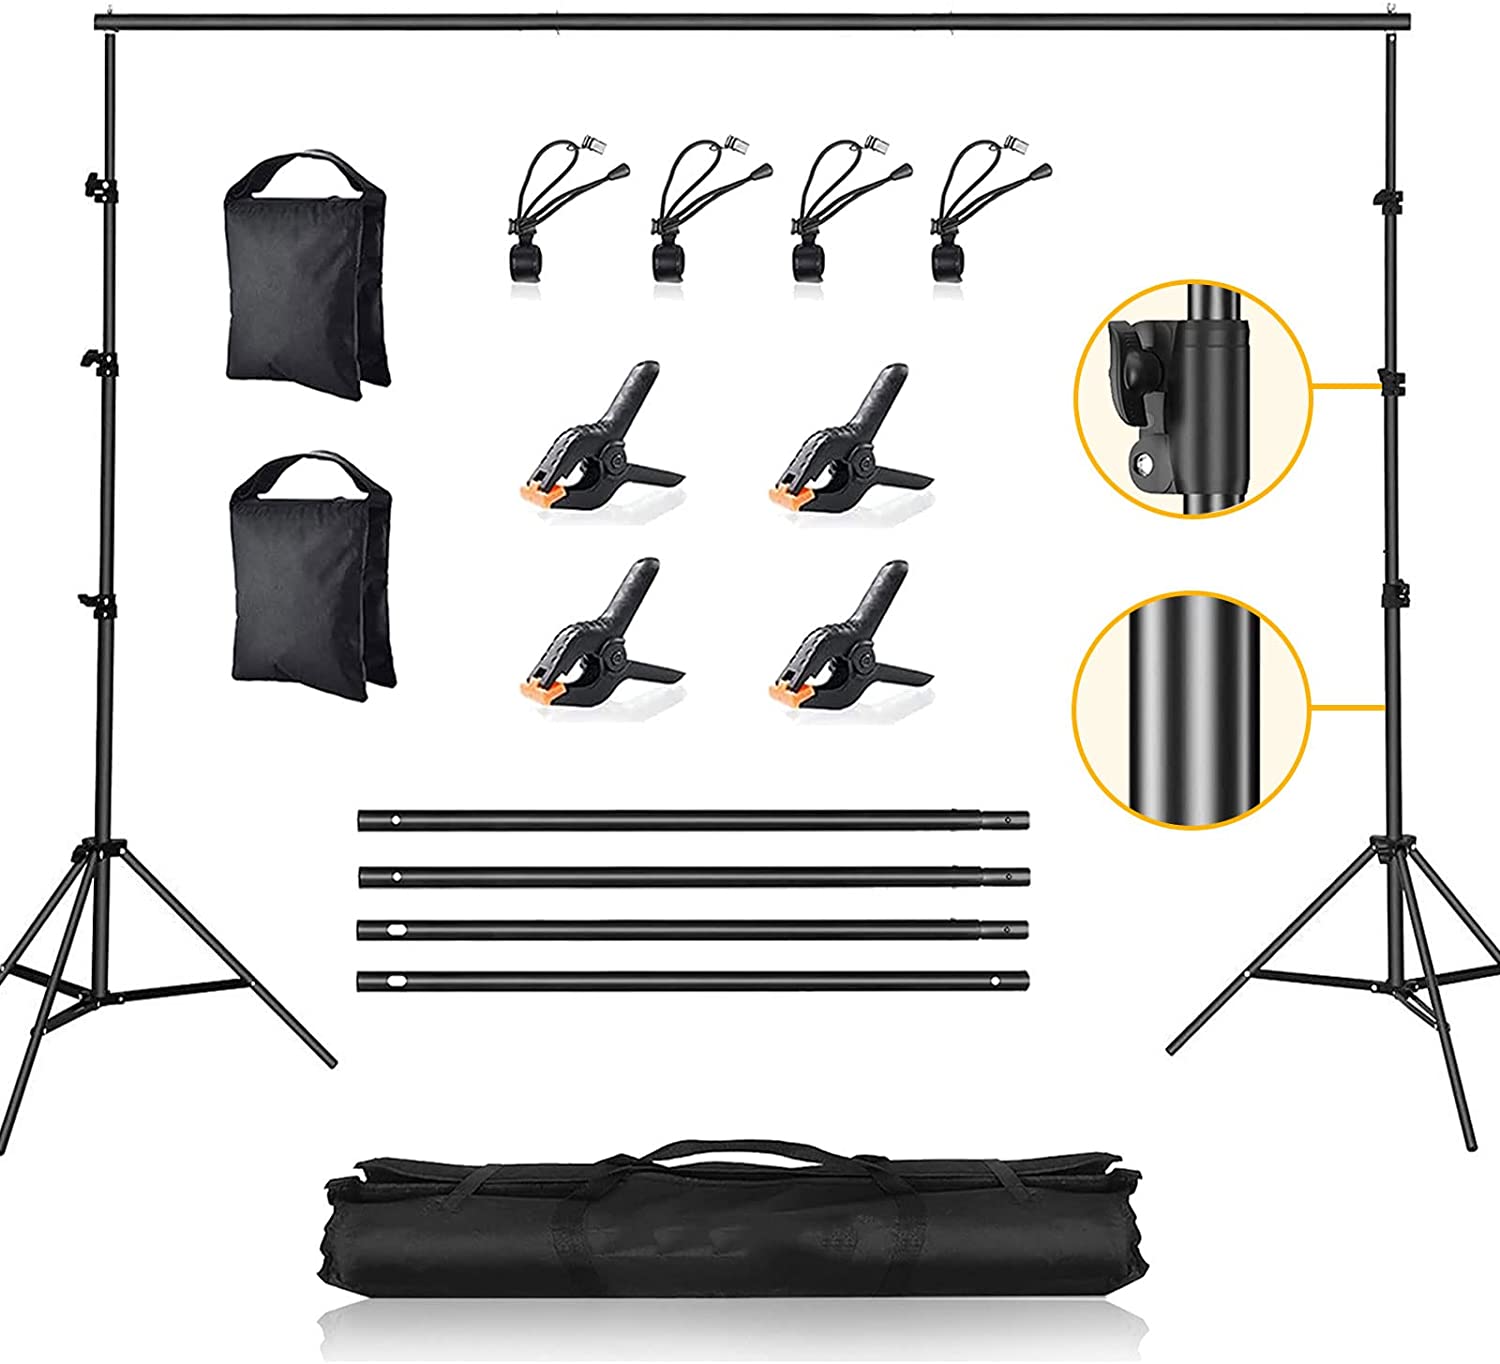 CPLIRIS Heavy-Duty Spring Clamps Backdrop Stand Set